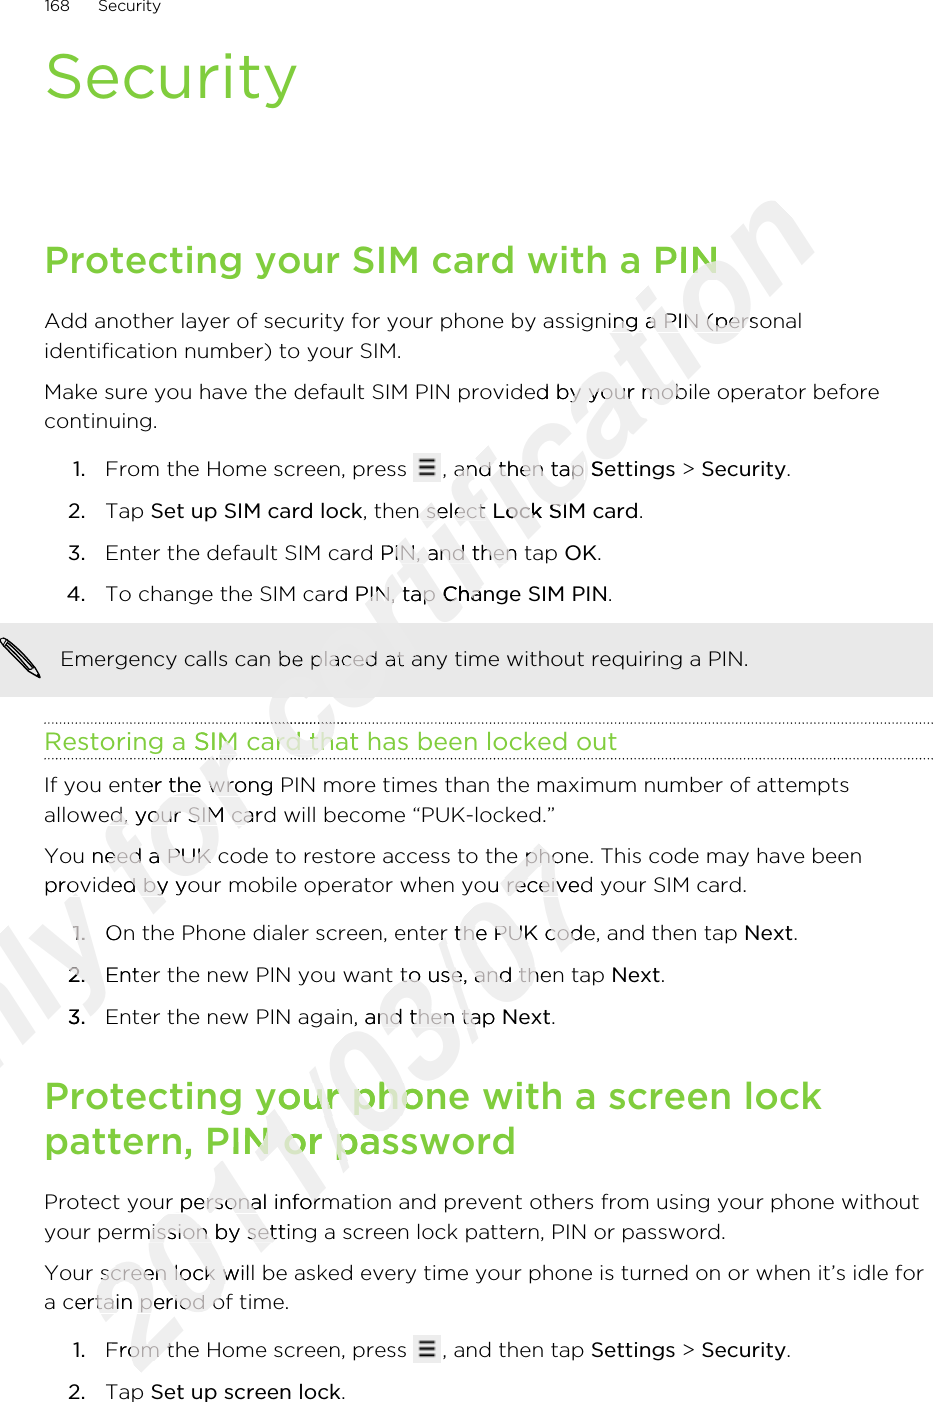 SecurityProtecting your SIM card with a PINAdd another layer of security for your phone by assigning a PIN (personalidentification number) to your SIM.Make sure you have the default SIM PIN provided by your mobile operator beforecontinuing.1. From the Home screen, press  , and then tap Settings &gt; Security.2. Tap Set up SIM card lock, then select Lock SIM card.3. Enter the default SIM card PIN, and then tap OK.4. To change the SIM card PIN, tap Change SIM PIN. Emergency calls can be placed at any time without requiring a PIN.Restoring a SIM card that has been locked outIf you enter the wrong PIN more times than the maximum number of attemptsallowed, your SIM card will become “PUK-locked.”You need a PUK code to restore access to the phone. This code may have beenprovided by your mobile operator when you received your SIM card.1. On the Phone dialer screen, enter the PUK code, and then tap Next.2. Enter the new PIN you want to use, and then tap Next.3. Enter the new PIN again, and then tap Next.Protecting your phone with a screen lockpattern, PIN or passwordProtect your personal information and prevent others from using your phone withoutyour permission by setting a screen lock pattern, PIN or password.Your screen lock will be asked every time your phone is turned on or when it’s idle fora certain period of time.1. From the Home screen, press  , and then tap Settings &gt; Security.2. Tap Set up screen lock.168 SecurityOnly provided by your mobile operator when you received your SIM card.Only provided by your mobile operator when you received your SIM card.1.Only 1.On the Phone dialer screen, enter the PUK code, and then tap Only On the Phone dialer screen, enter the PUK code, and then tap 2.Only 2.Enter the new PIN you want to use, and then tap Only Enter the new PIN you want to use, and then tap 3.Only 3.for Restoring a SIM card that has been locked outfor Restoring a SIM card that has been locked outfor for If you enter the wrong PIN more times than the maximum number of attemptsfor If you enter the wrong PIN more times than the maximum number of attemptsallowed, your SIM card will become “PUK-locked.”for allowed, your SIM card will become “PUK-locked.”You need a PUK code to restore access to the phone. This code may have beenfor You need a PUK code to restore access to the phone. This code may have beenprovided by your mobile operator when you received your SIM card.for provided by your mobile operator when you received your SIM card.certification Protecting your SIM card with a PINcertification Protecting your SIM card with a PINAdd another layer of security for your phone by assigning a PIN (personalcertification Add another layer of security for your phone by assigning a PIN (personalMake sure you have the default SIM PIN provided by your mobile operator beforecertification Make sure you have the default SIM PIN provided by your mobile operator before, and then tap certification , and then tap Settingscertification Settings, then select certification , then select Lock SIM cardcertification Lock SIM cardEnter the default SIM card PIN, and then tap certification Enter the default SIM card PIN, and then tap To change the SIM card PIN, tap certification To change the SIM card PIN, tap Change SIM PINcertification Change SIM PINcertification Emergency calls can be placed at any time without requiring a PIN.certification Emergency calls can be placed at any time without requiring a PIN.Restoring a SIM card that has been locked outcertification Restoring a SIM card that has been locked outcertification certification 2011/03/07You need a PUK code to restore access to the phone. This code may have been2011/03/07You need a PUK code to restore access to the phone. This code may have beenprovided by your mobile operator when you received your SIM card.2011/03/07provided by your mobile operator when you received your SIM card.On the Phone dialer screen, enter the PUK code, and then tap 2011/03/07On the Phone dialer screen, enter the PUK code, and then tap Enter the new PIN you want to use, and then tap 2011/03/07Enter the new PIN you want to use, and then tap Enter the new PIN again, and then tap 2011/03/07Enter the new PIN again, and then tap Next2011/03/07NextProtecting your phone with a screen lock2011/03/07Protecting your phone with a screen lockpattern, PIN or password2011/03/07pattern, PIN or passwordProtect your personal information and prevent others from using your phone without2011/03/07Protect your personal information and prevent others from using your phone withoutyour permission by setting a screen lock pattern, PIN or password.2011/03/07your permission by setting a screen lock pattern, PIN or password.Your screen lock will be asked every time your phone is turned on or when it’s idle for2011/03/07Your screen lock will be asked every time your phone is turned on or when it’s idle for2011/03/07a certain period of time.2011/03/07a certain period of time.From the Home screen, press 2011/03/07From the Home screen, press 